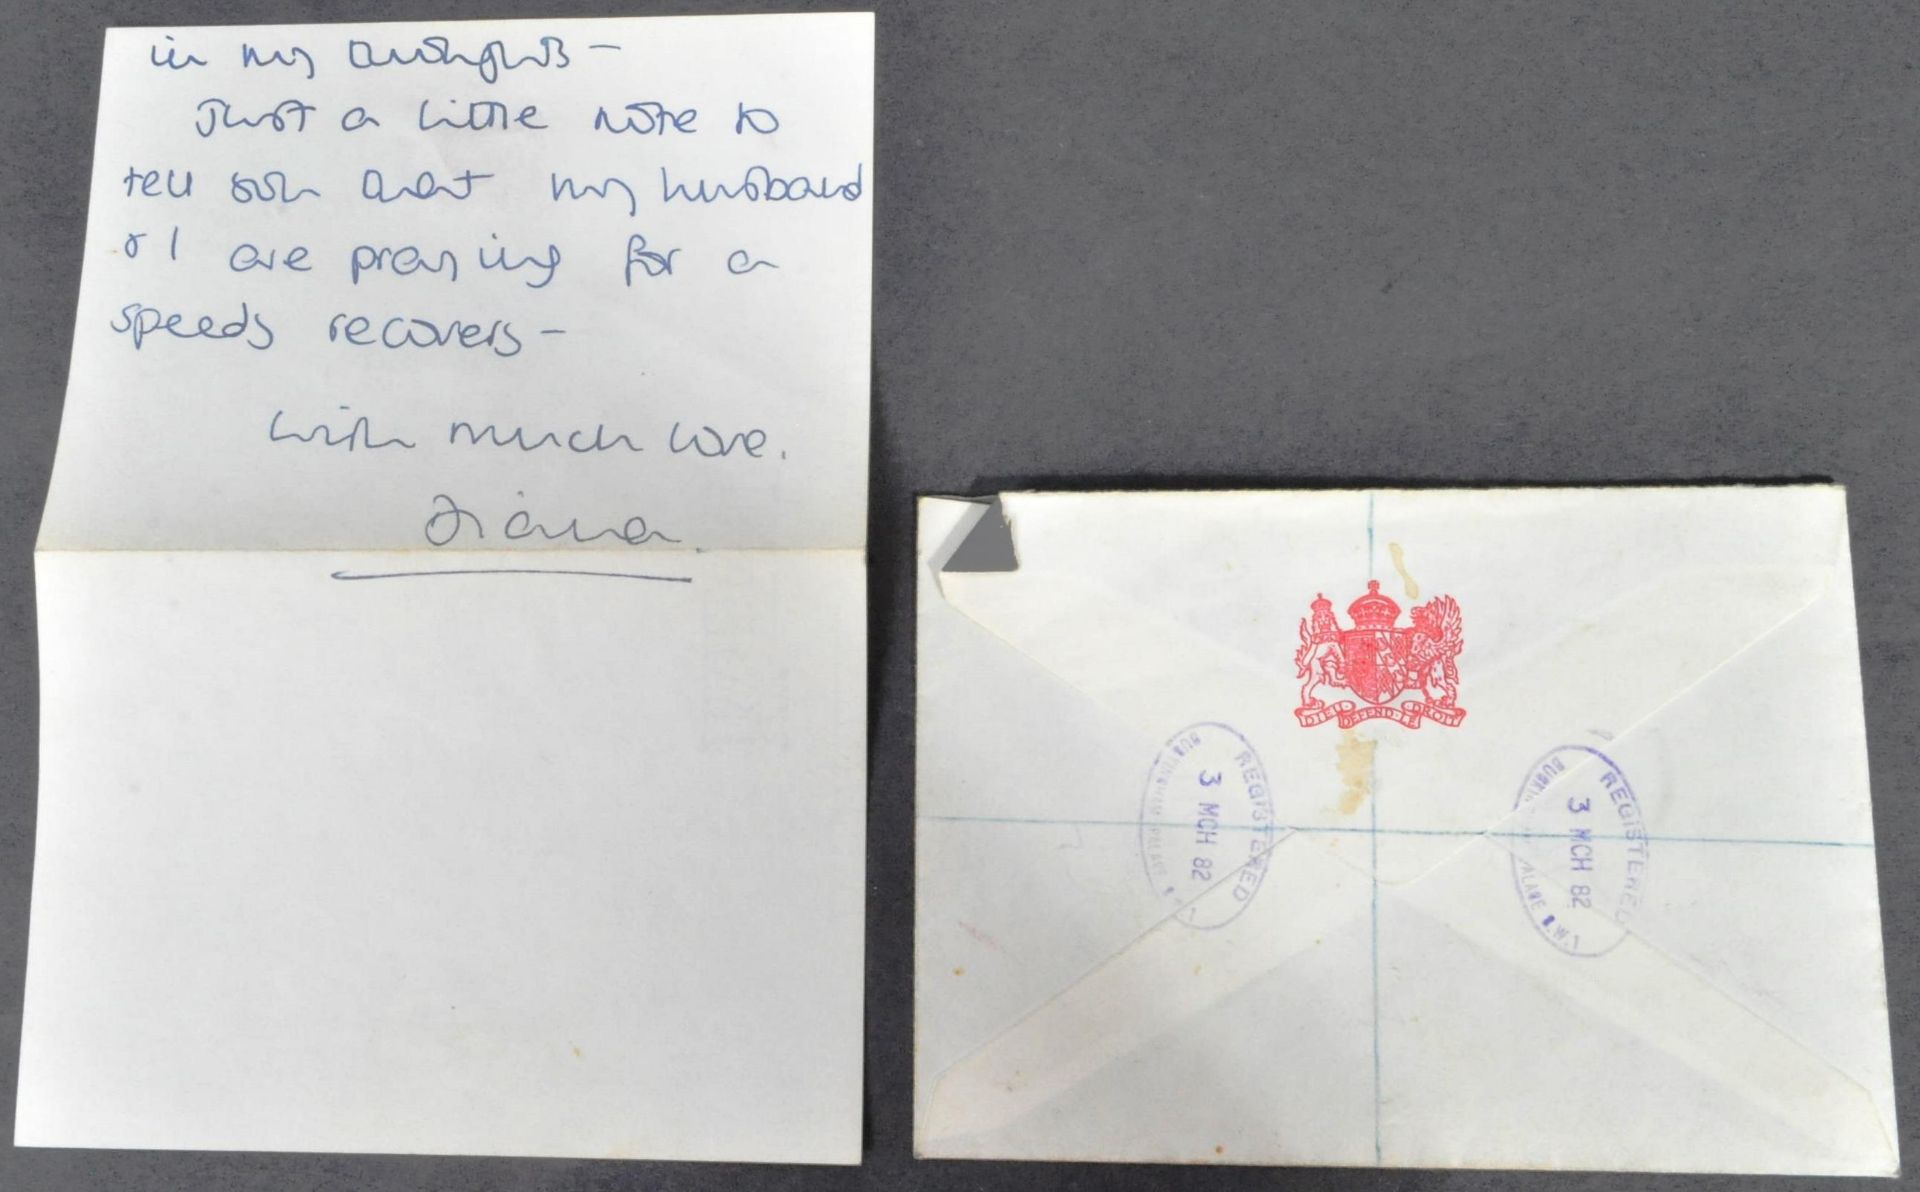 DIANA PRINCESS OF WALES (1961-1997) - HANDWRITTEN LETTER - Image 2 of 2